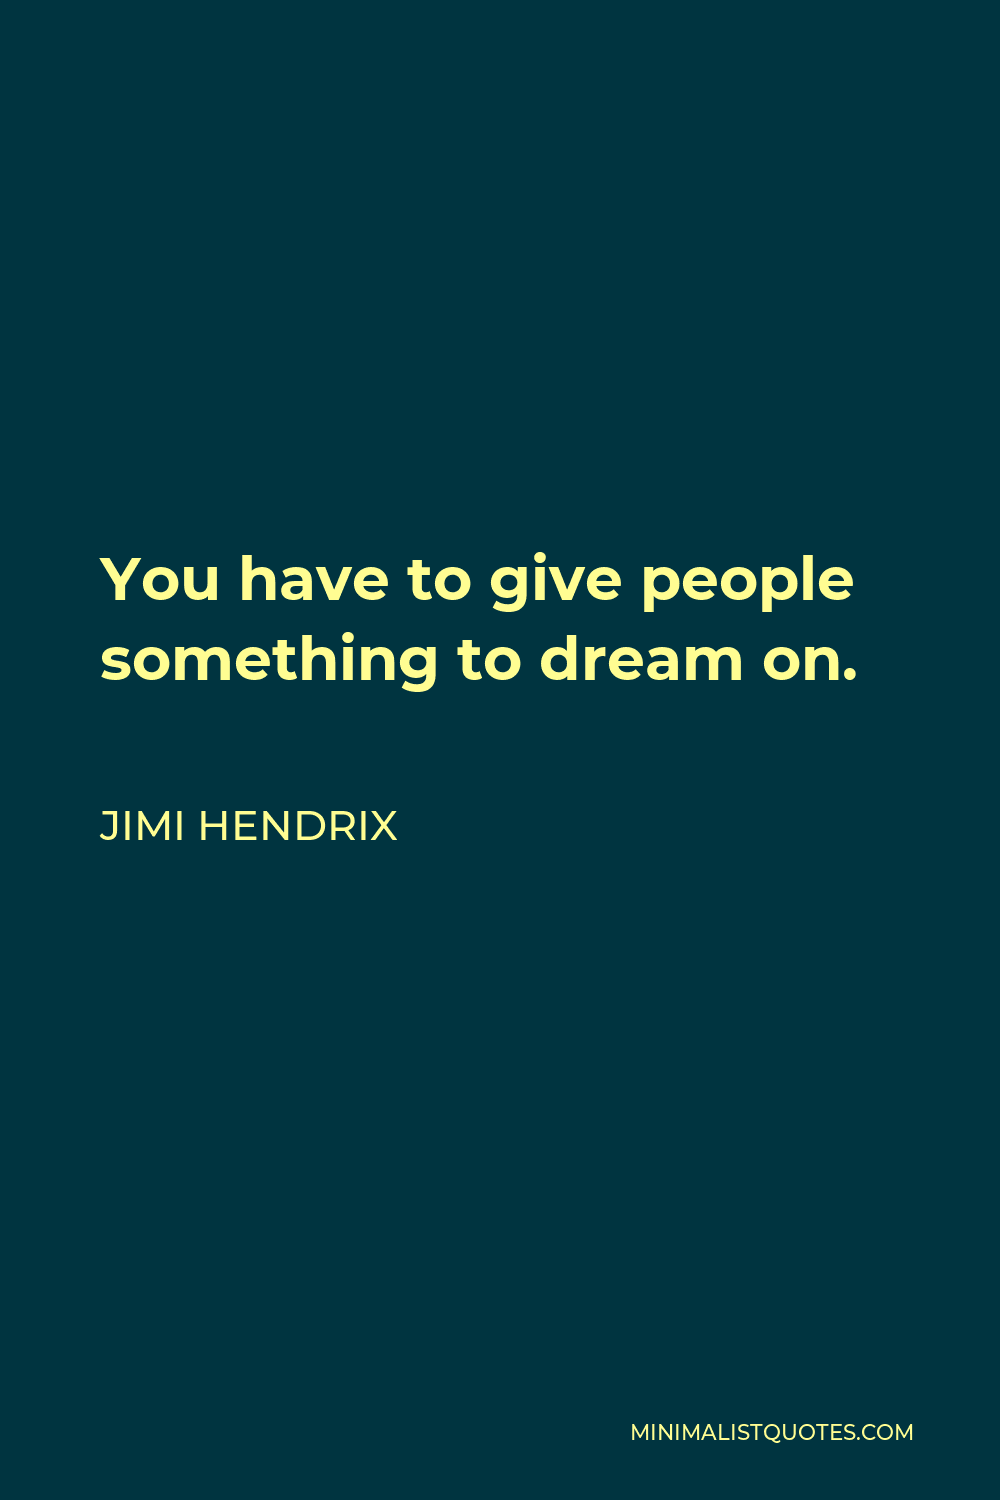 Jimi Hendrix Quote - You have to give people something to dream on.